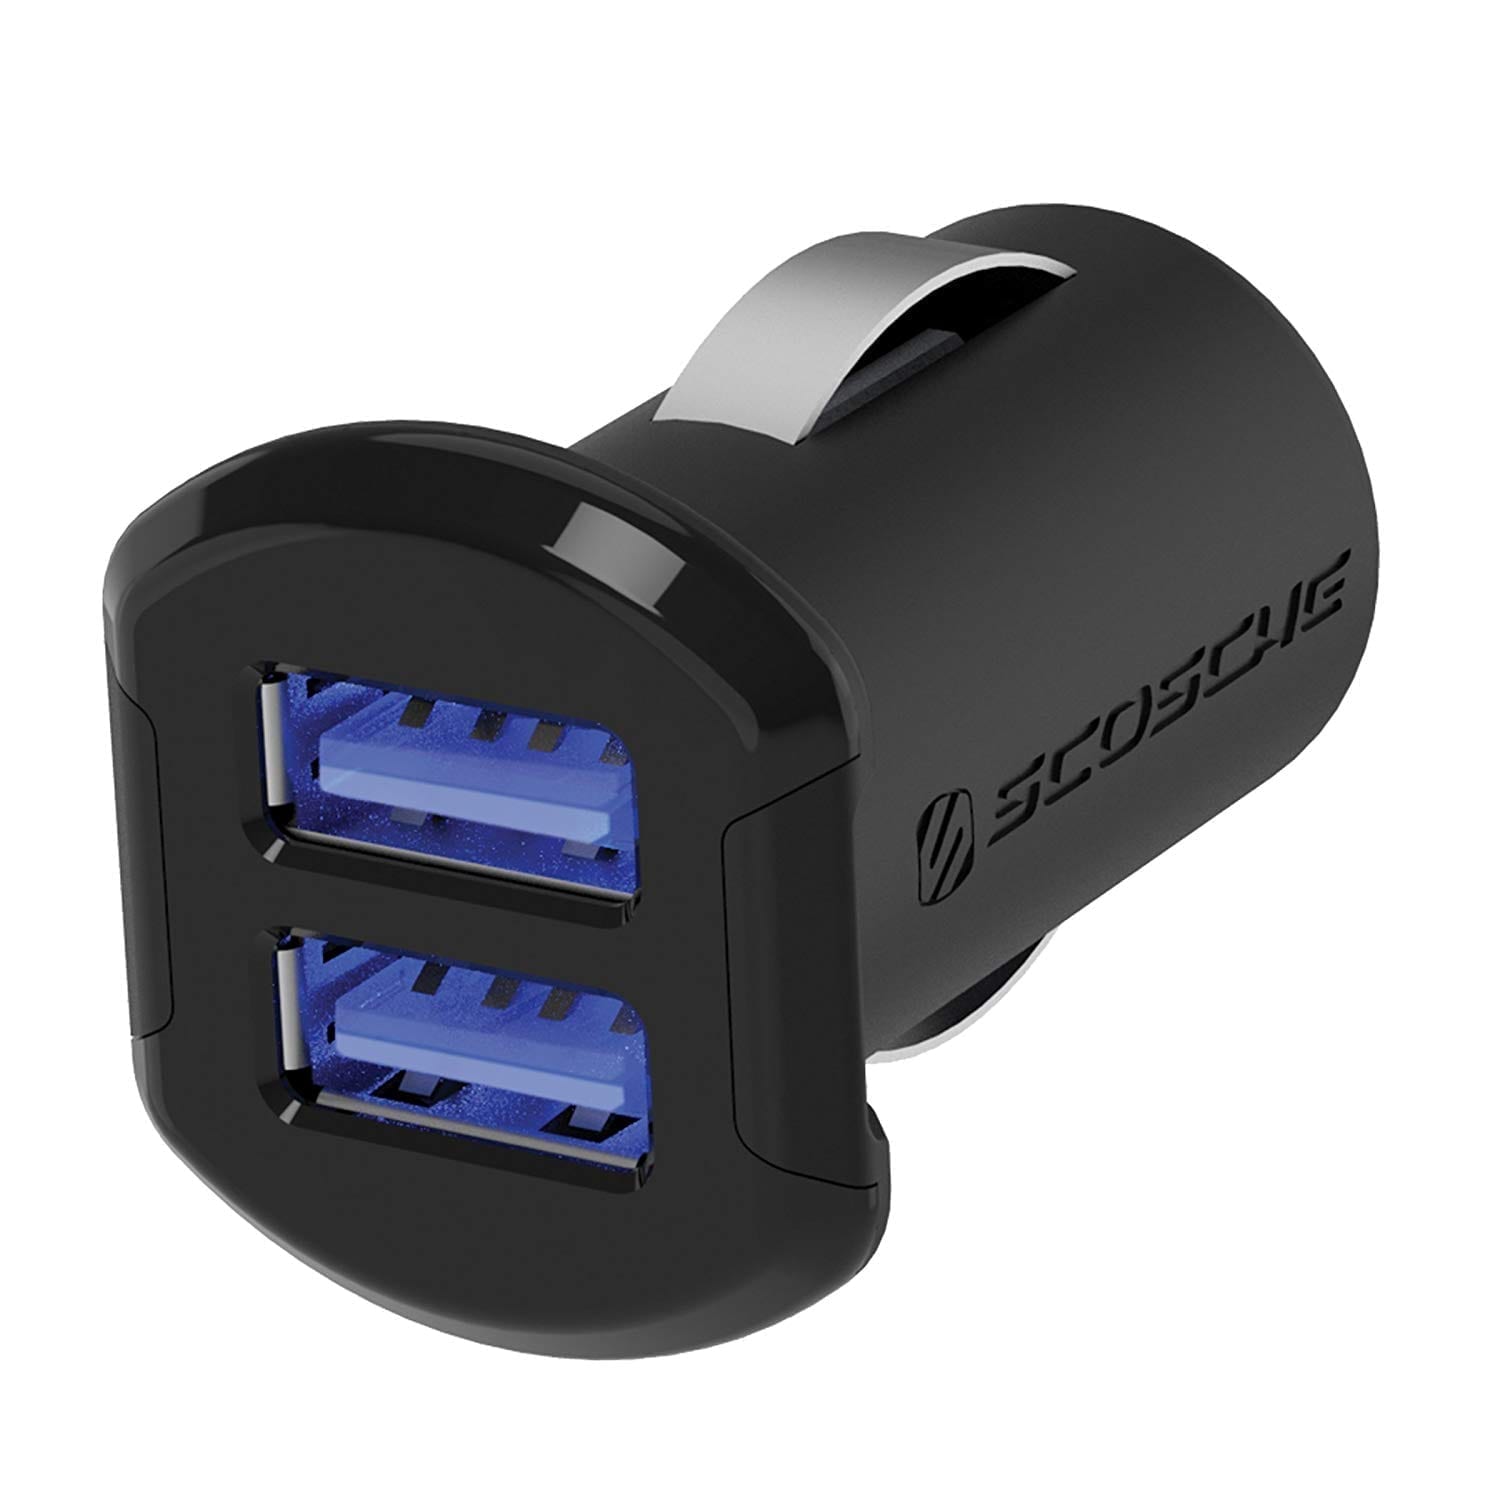 Scosche USB Charger dual usb charger front view